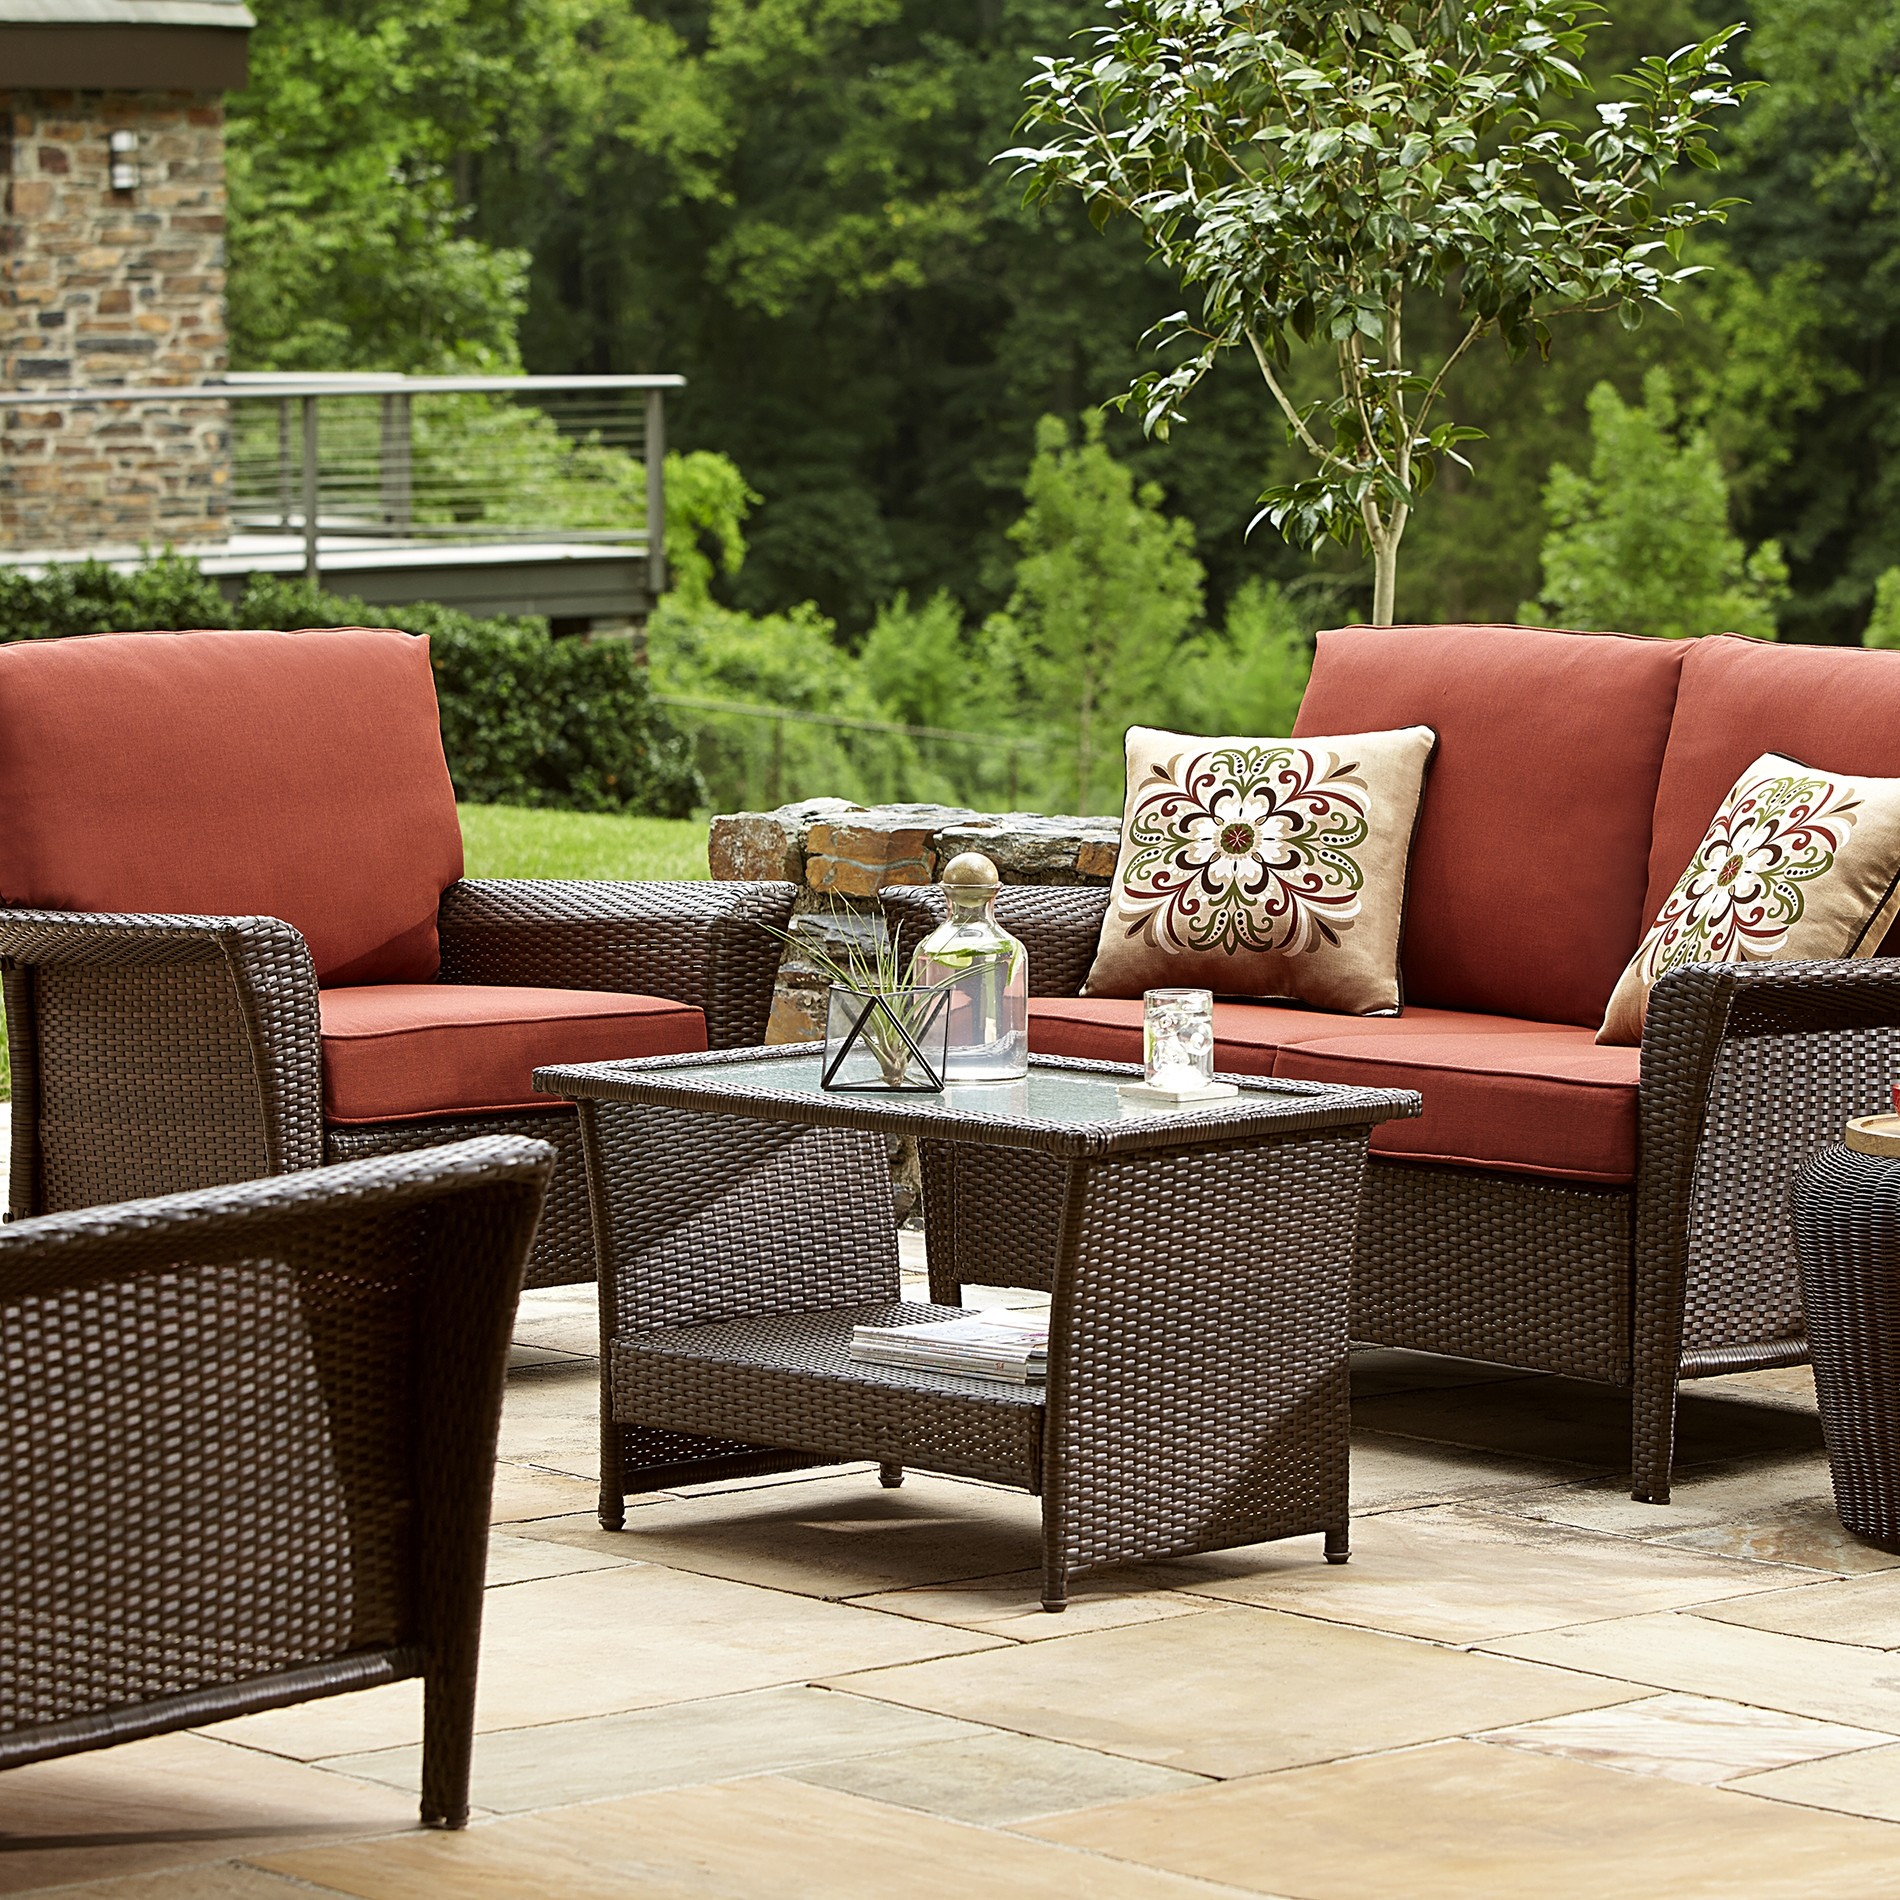 Awesome Patio Furniture Raleigh Nc Creative Design Ideas in dimensions 1900 X 1900